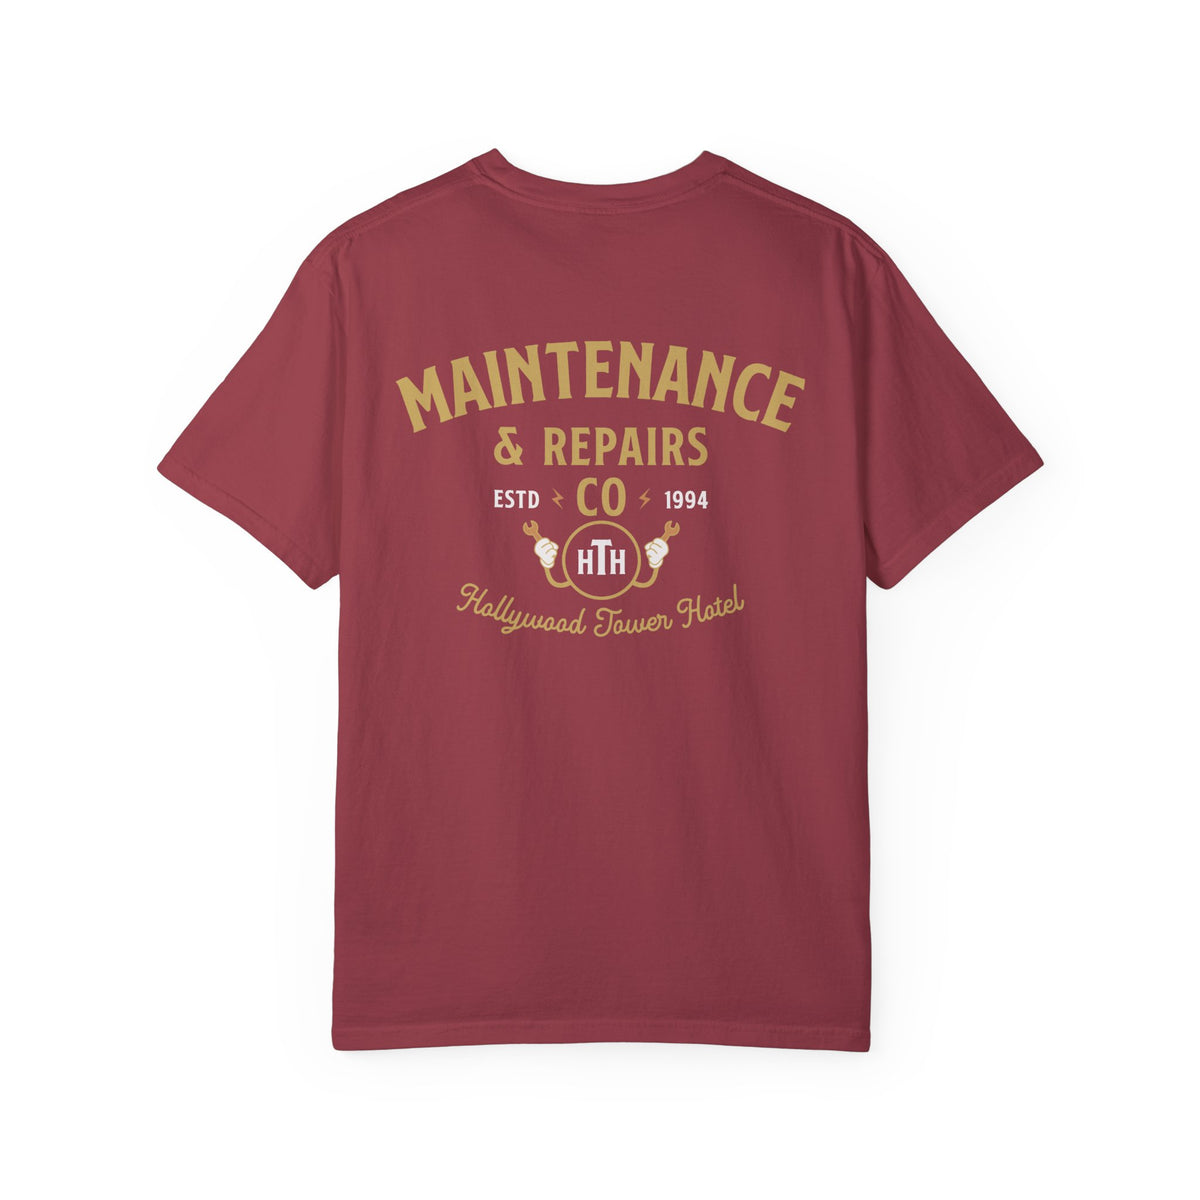 Hollywood Tower Hotel Maintenance & Repairs Comfort Colors Unisex Garment-Dyed T-shirt